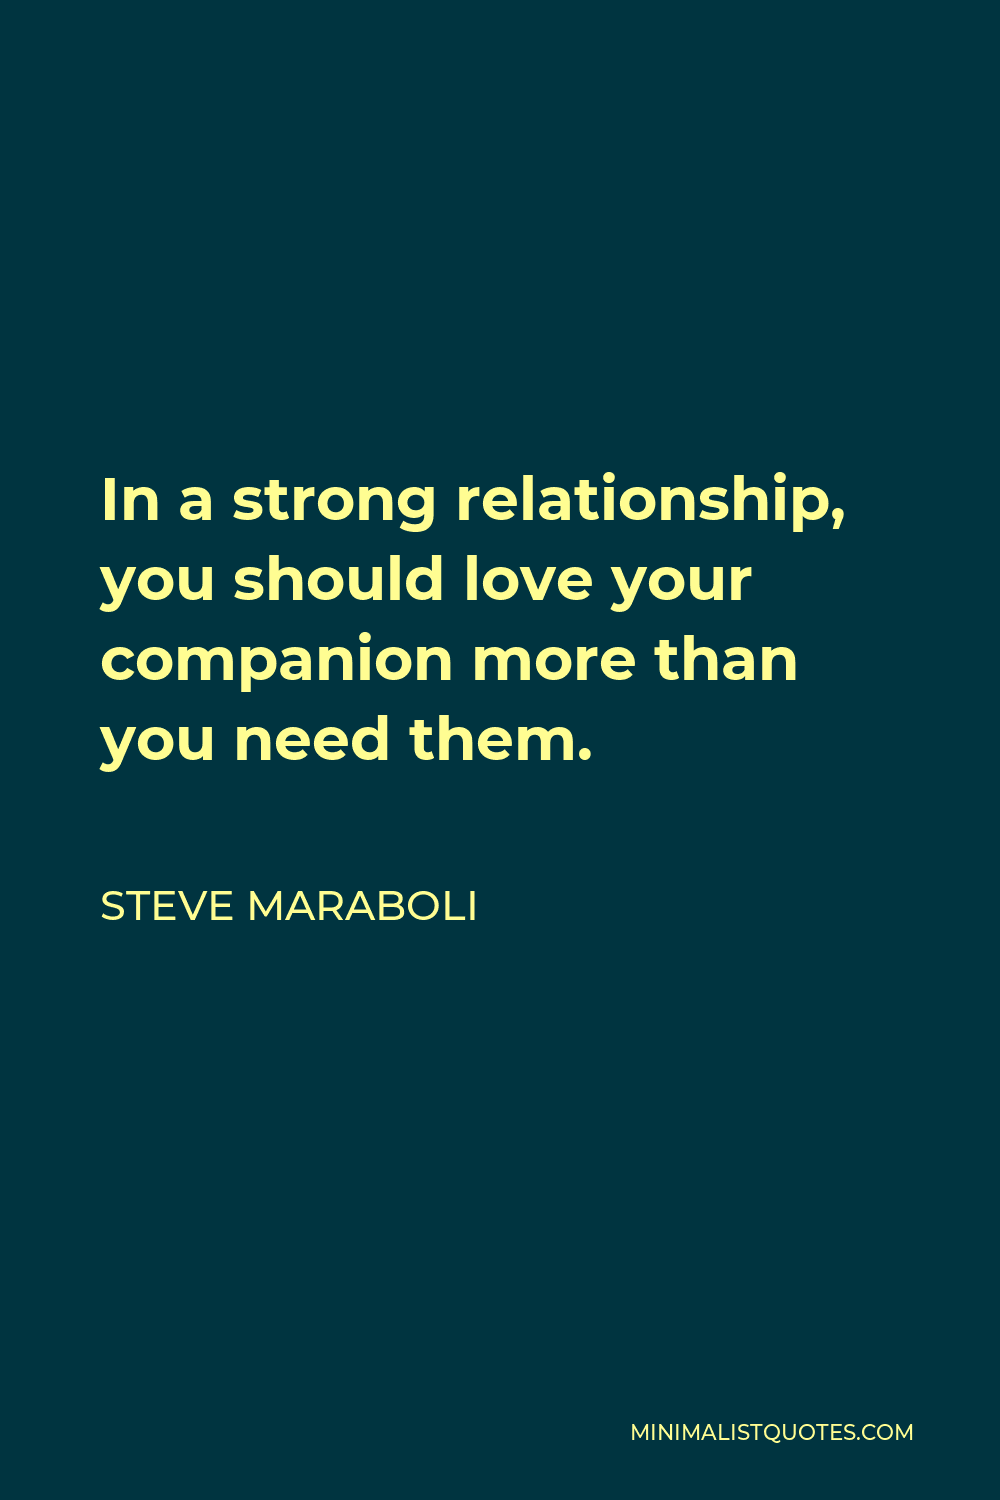 Steve Maraboli Quote - In a strong relationship, you should love your companion more than you need them.